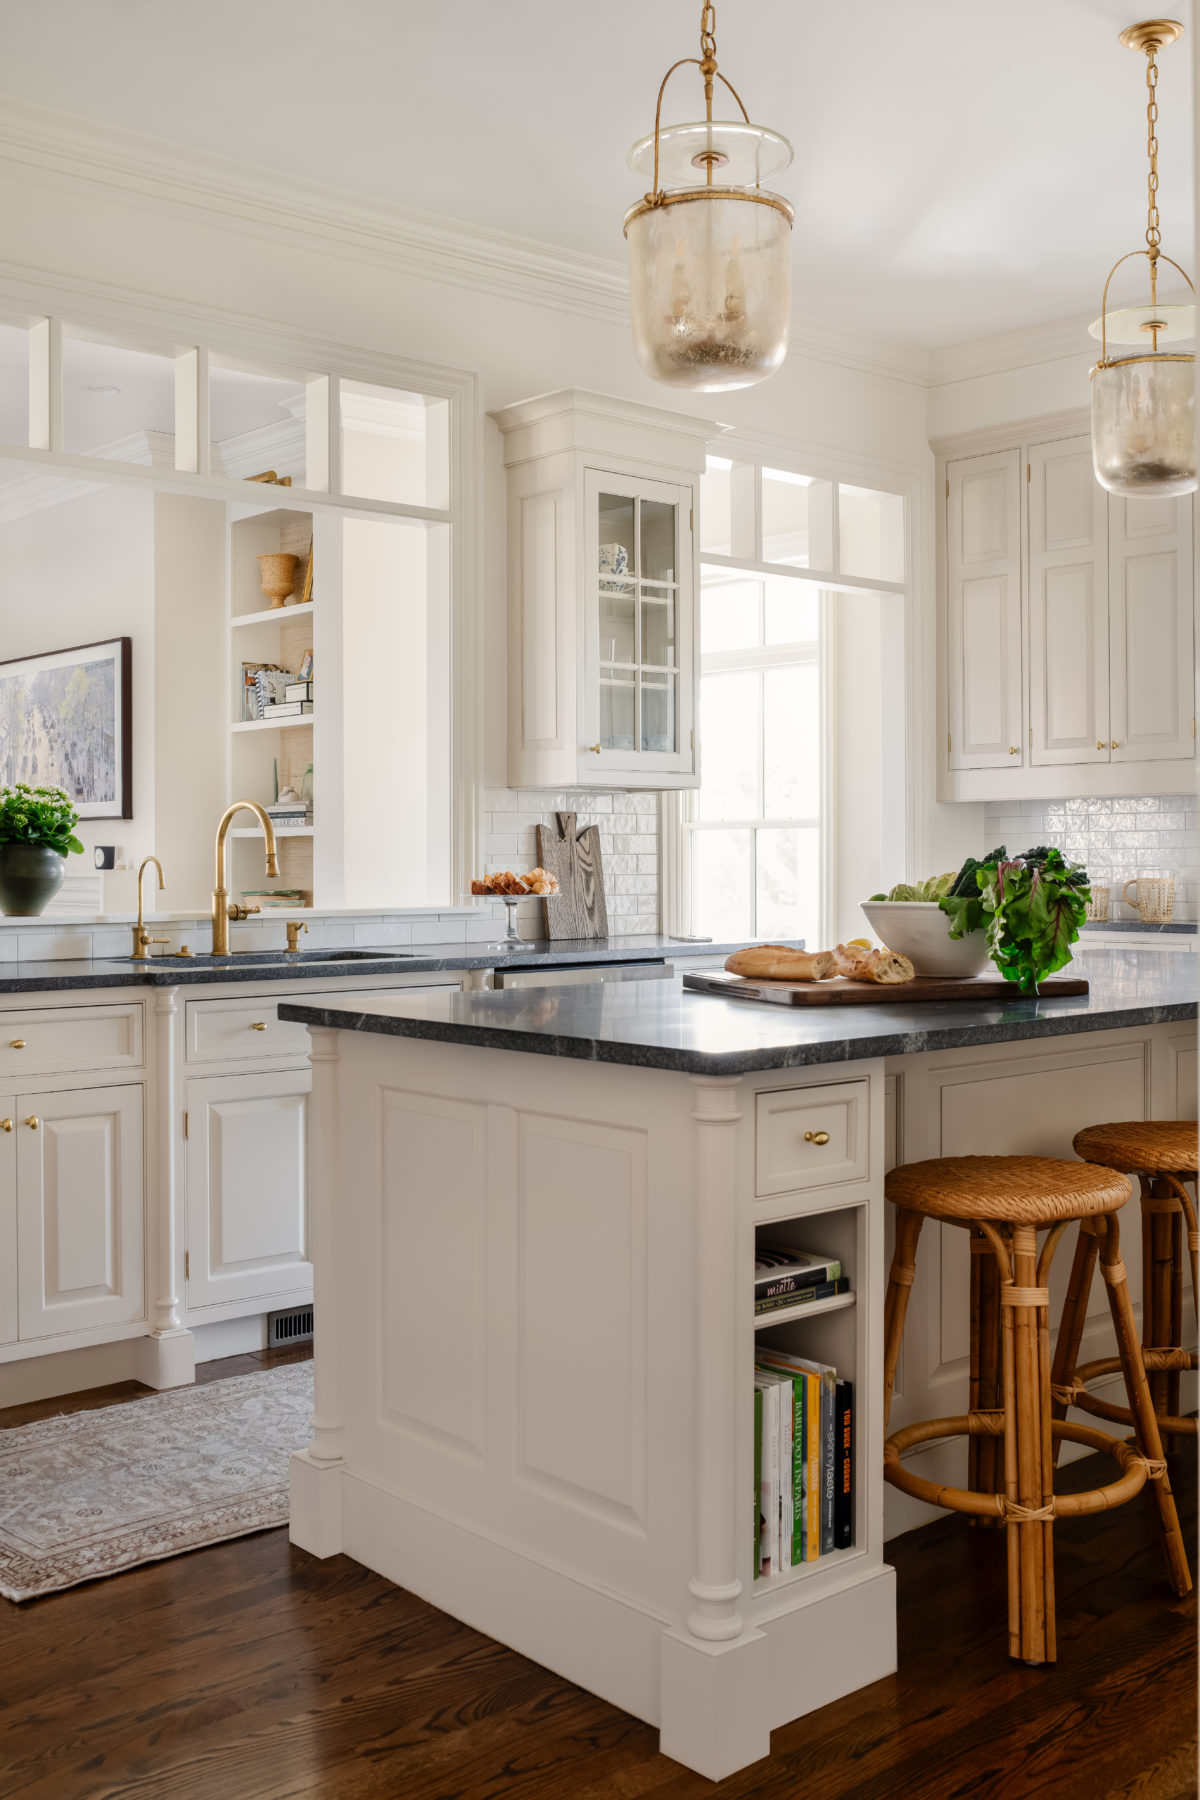 23 Timeless Kitchen Design Ideas That Are Here to Stay